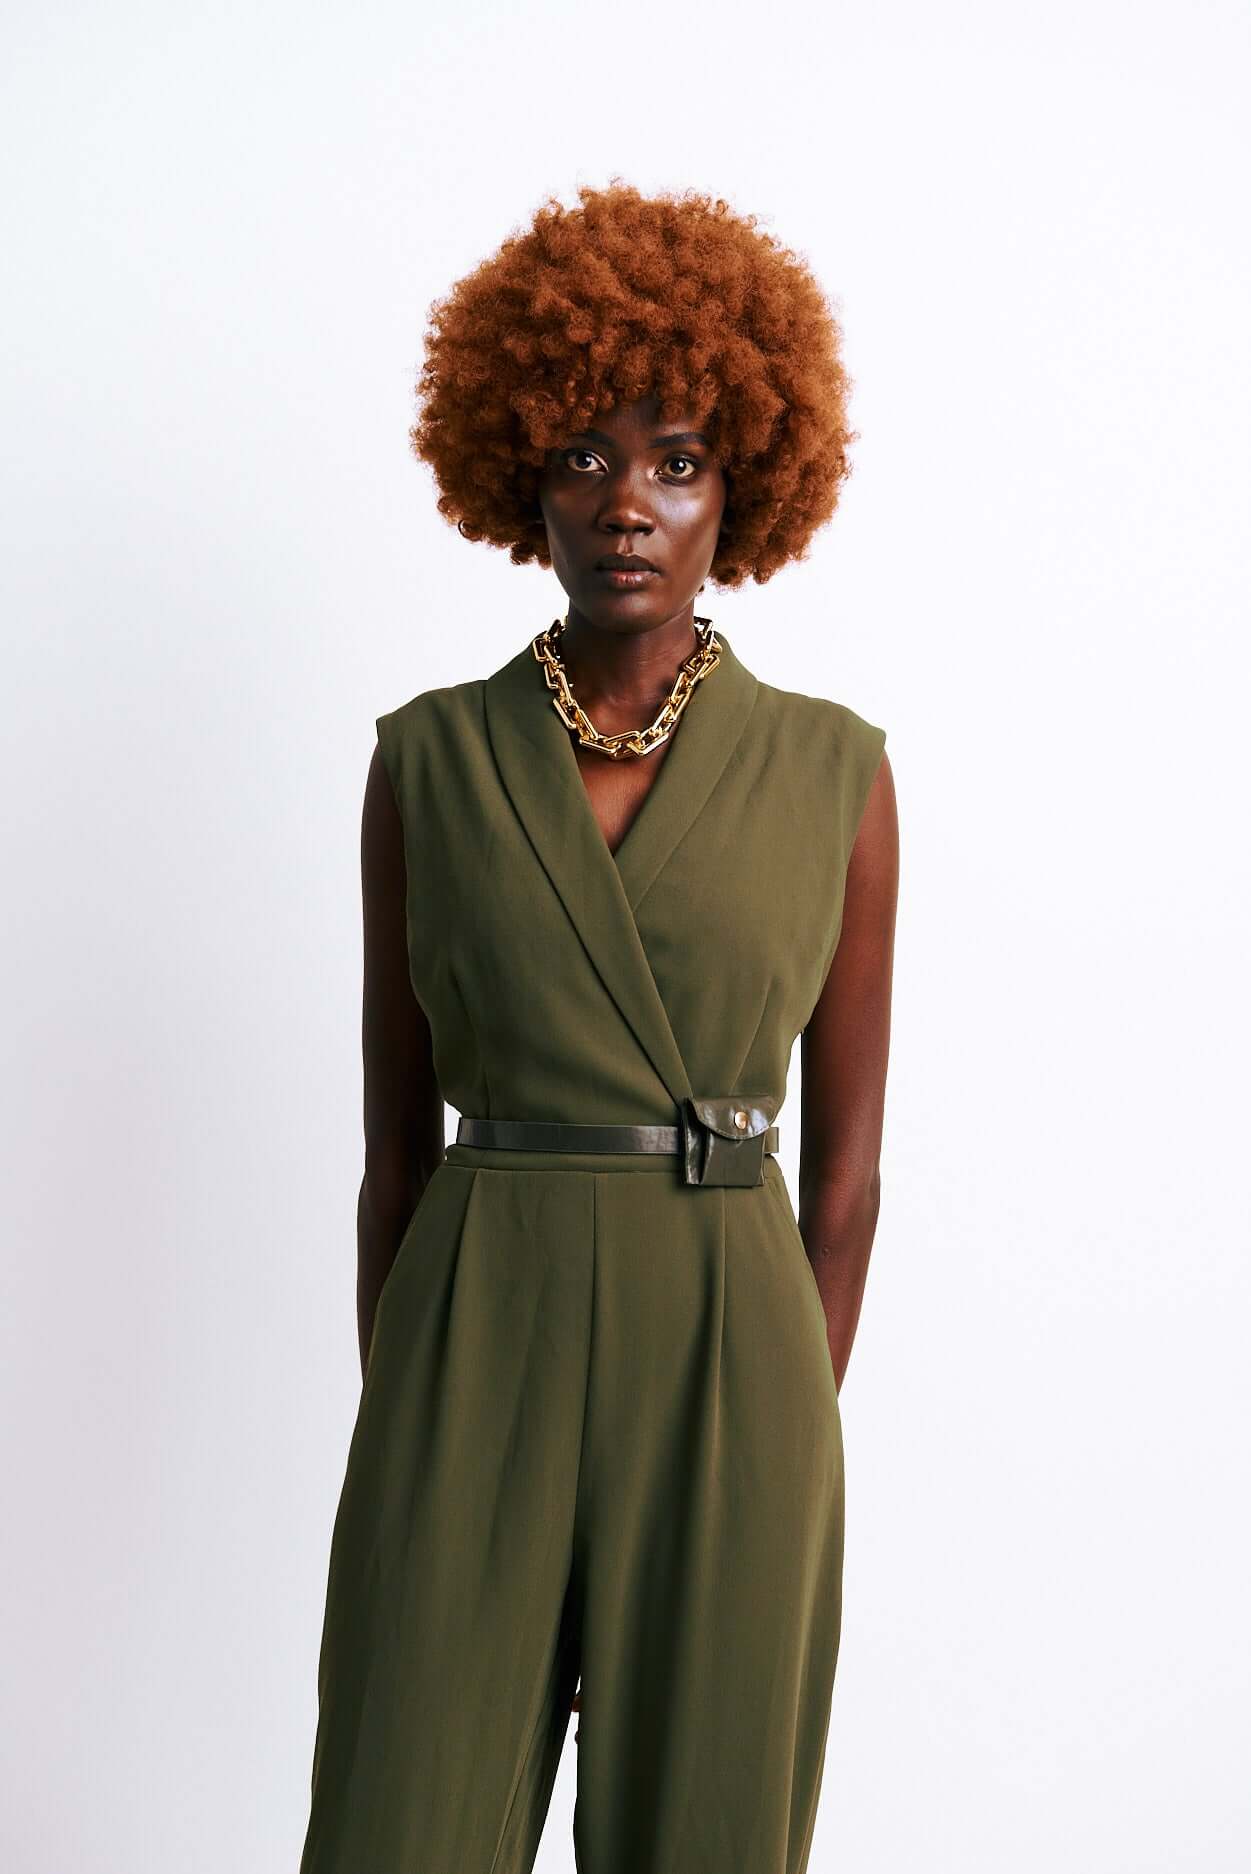 Shop Sleeveless Jumpsuit with Money Pouch Belt by The Fashion Frenzy on Arrai. Discover stylish, affordable clothing, jewelry, handbags and unique handmade pieces from top Kenyan & African fashion brands prioritising sustainability and quality craftsmansh